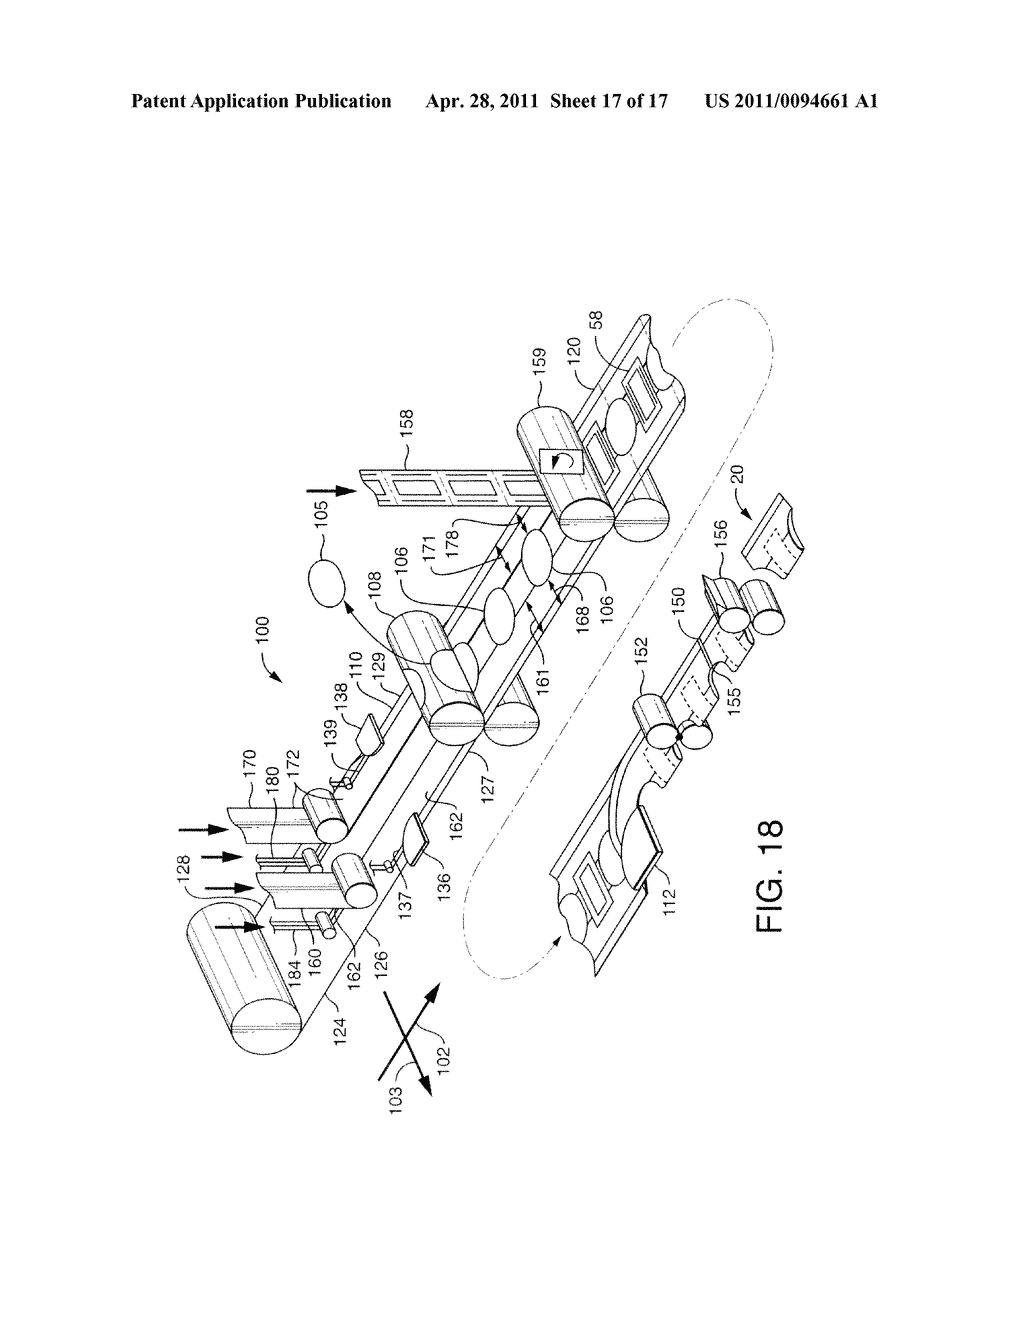 METHOD OF MAKING DISPOSABLE ABSORBENT GARMENTS EMPLOYING ELASTOMERIC FILM LAMINATE BODY PANELS - diagram, schematic, and image 18